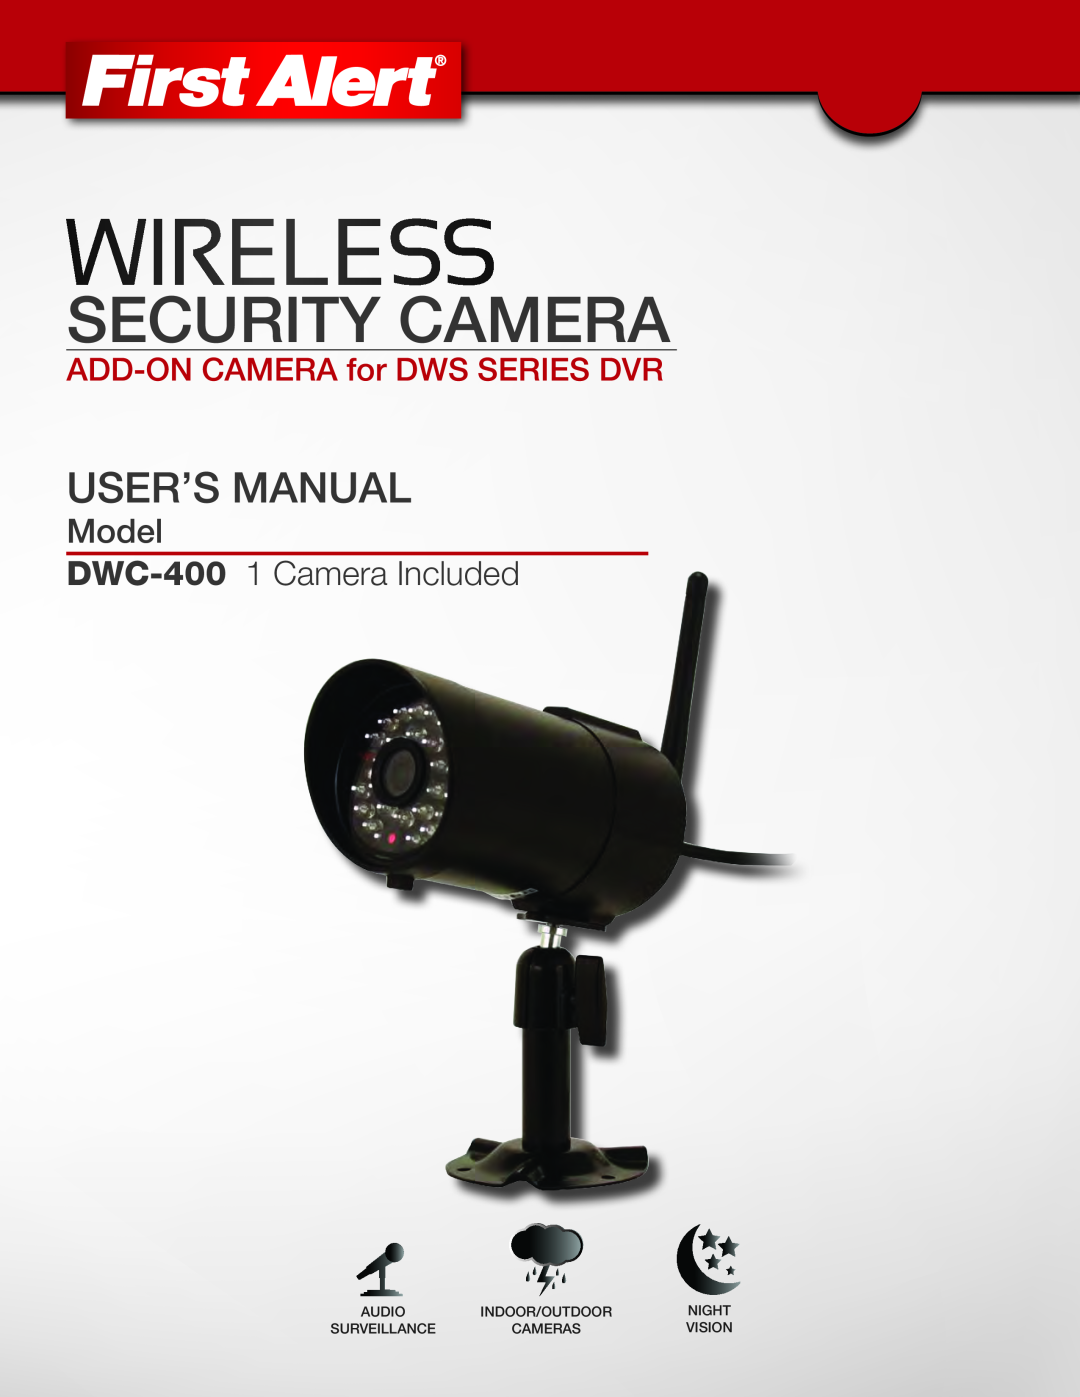 First Alert user manual Security Camera, Model DWC-400 1 Camera Included, ADD-ONCAMERA for DWS SERIES DVR 